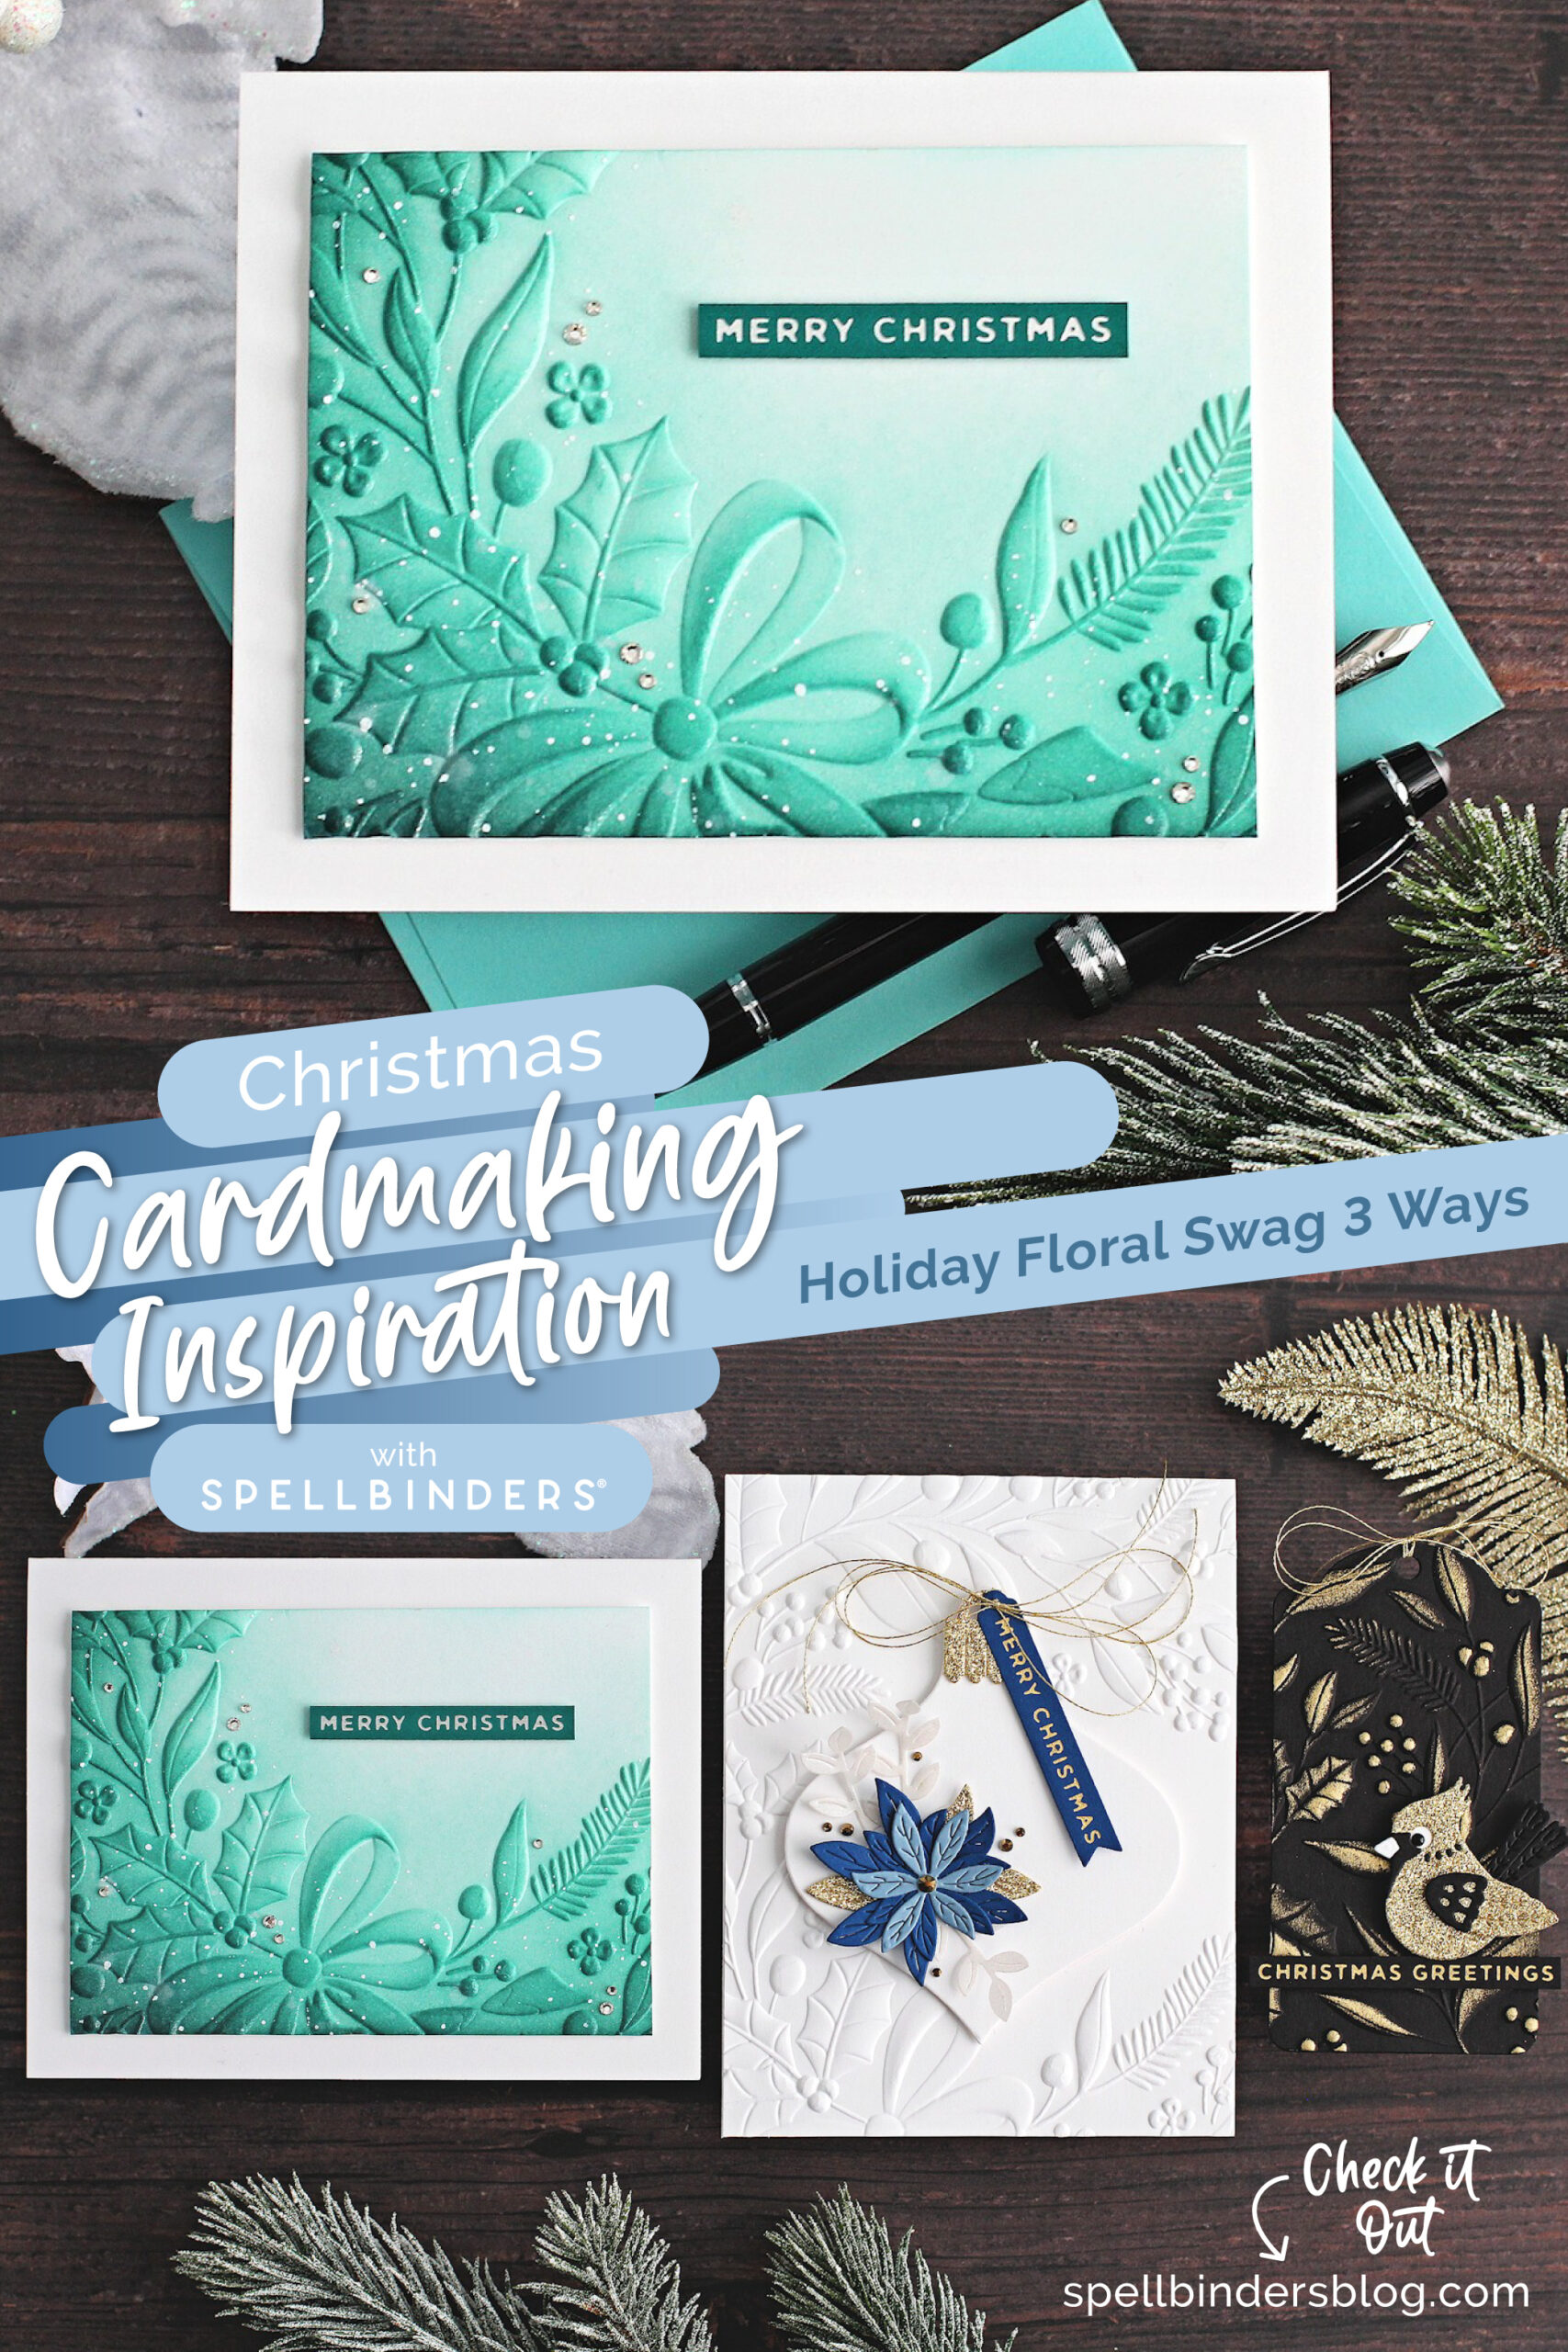 Spellbinders Holiday Floral Swag 3D Embossing Inspiration